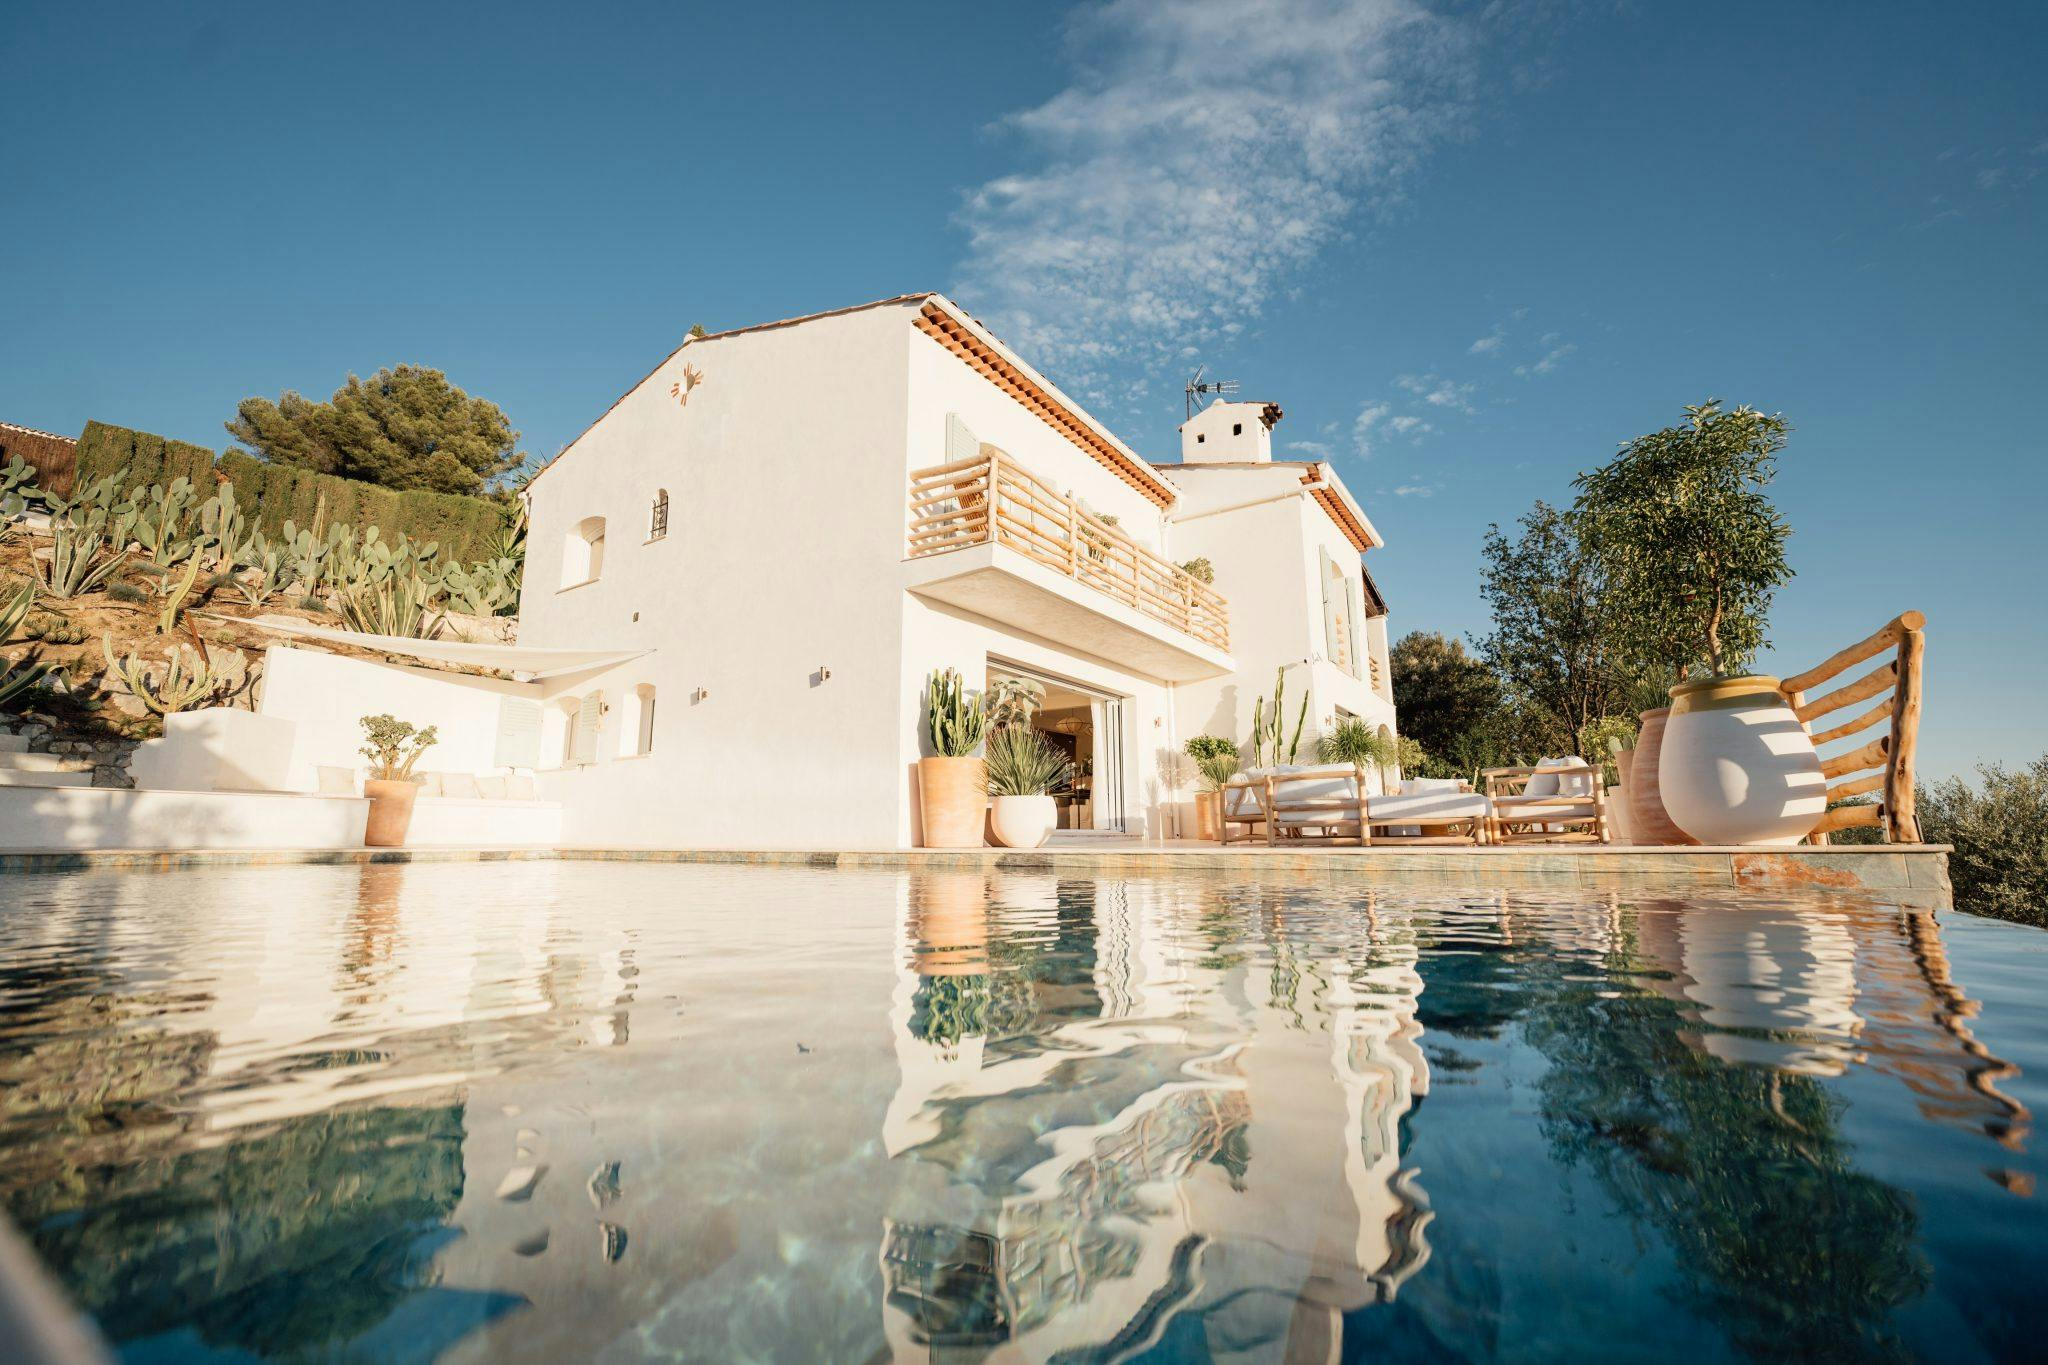 View of the house from the water of the pool, reflecting the white hues